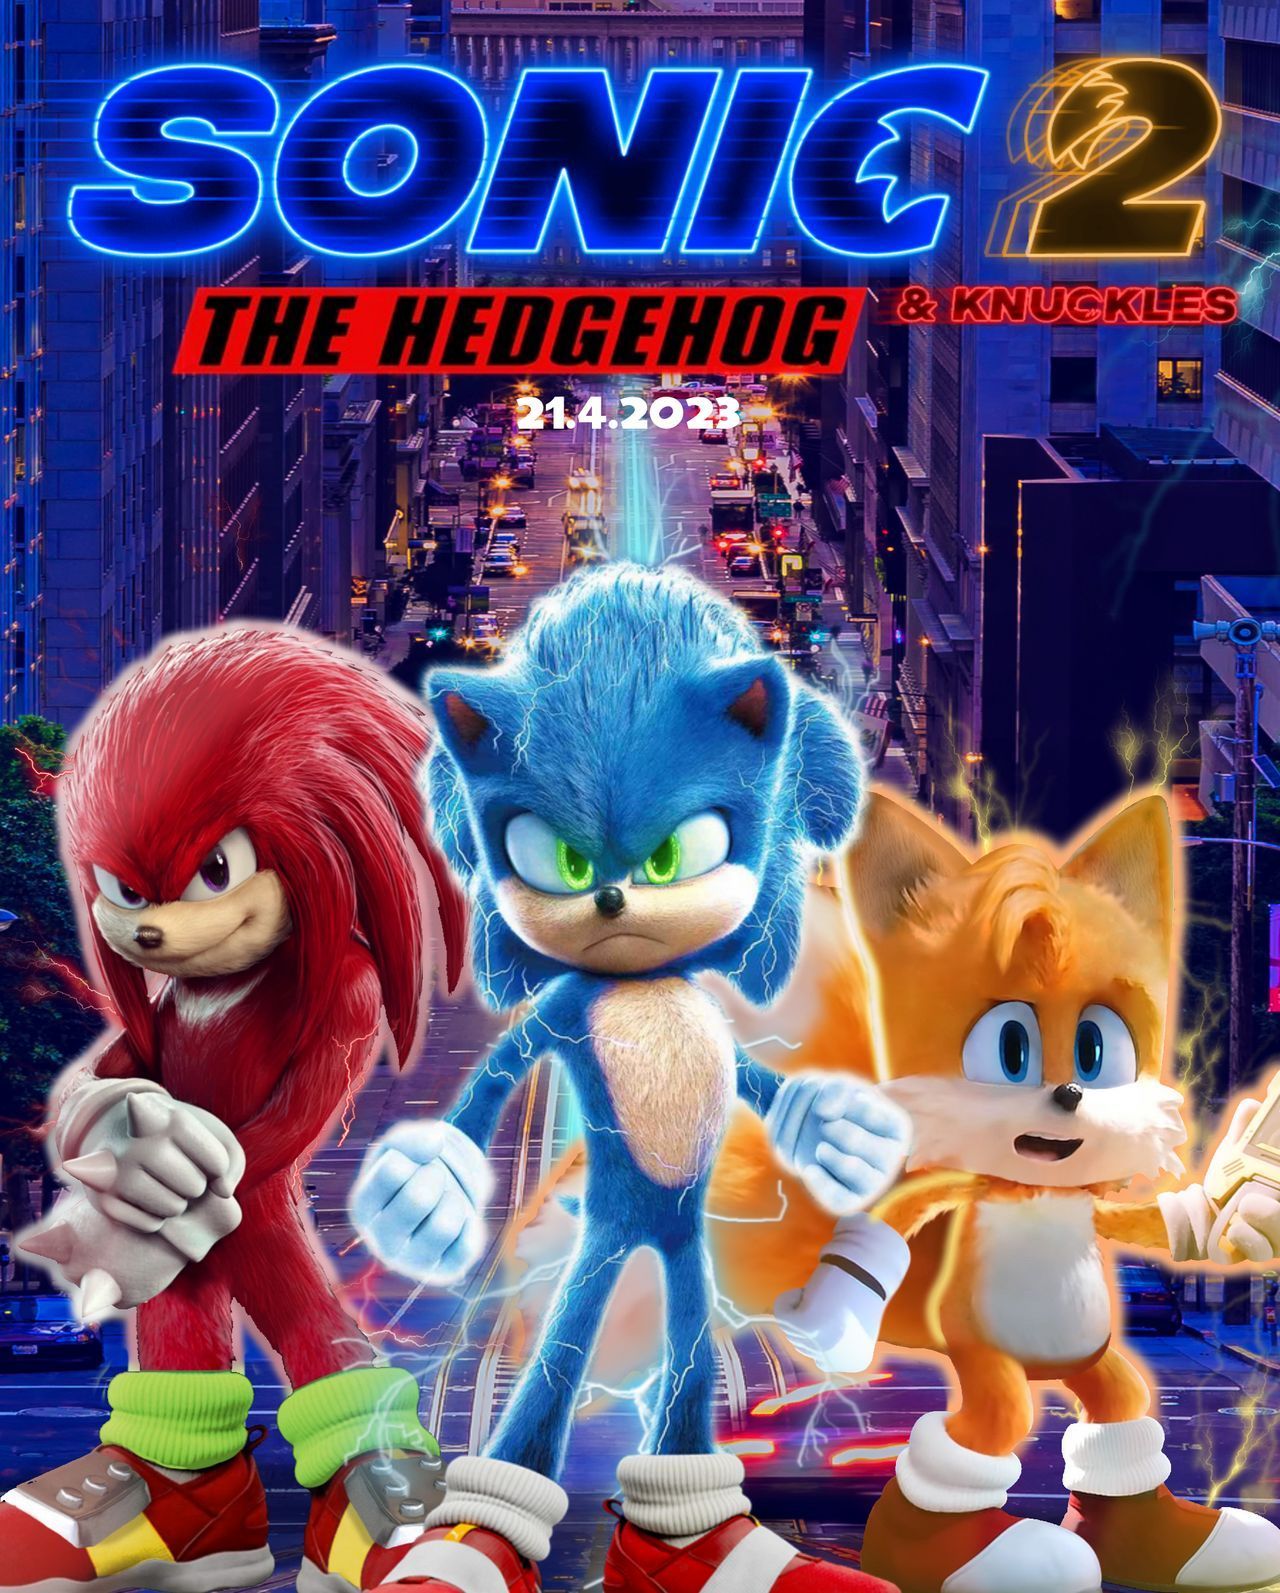 Pin By Warriorslover Sonic On Sonic In 2020. Sonic Birthday, Hedgehog Movie, Sonic The Hedgehog